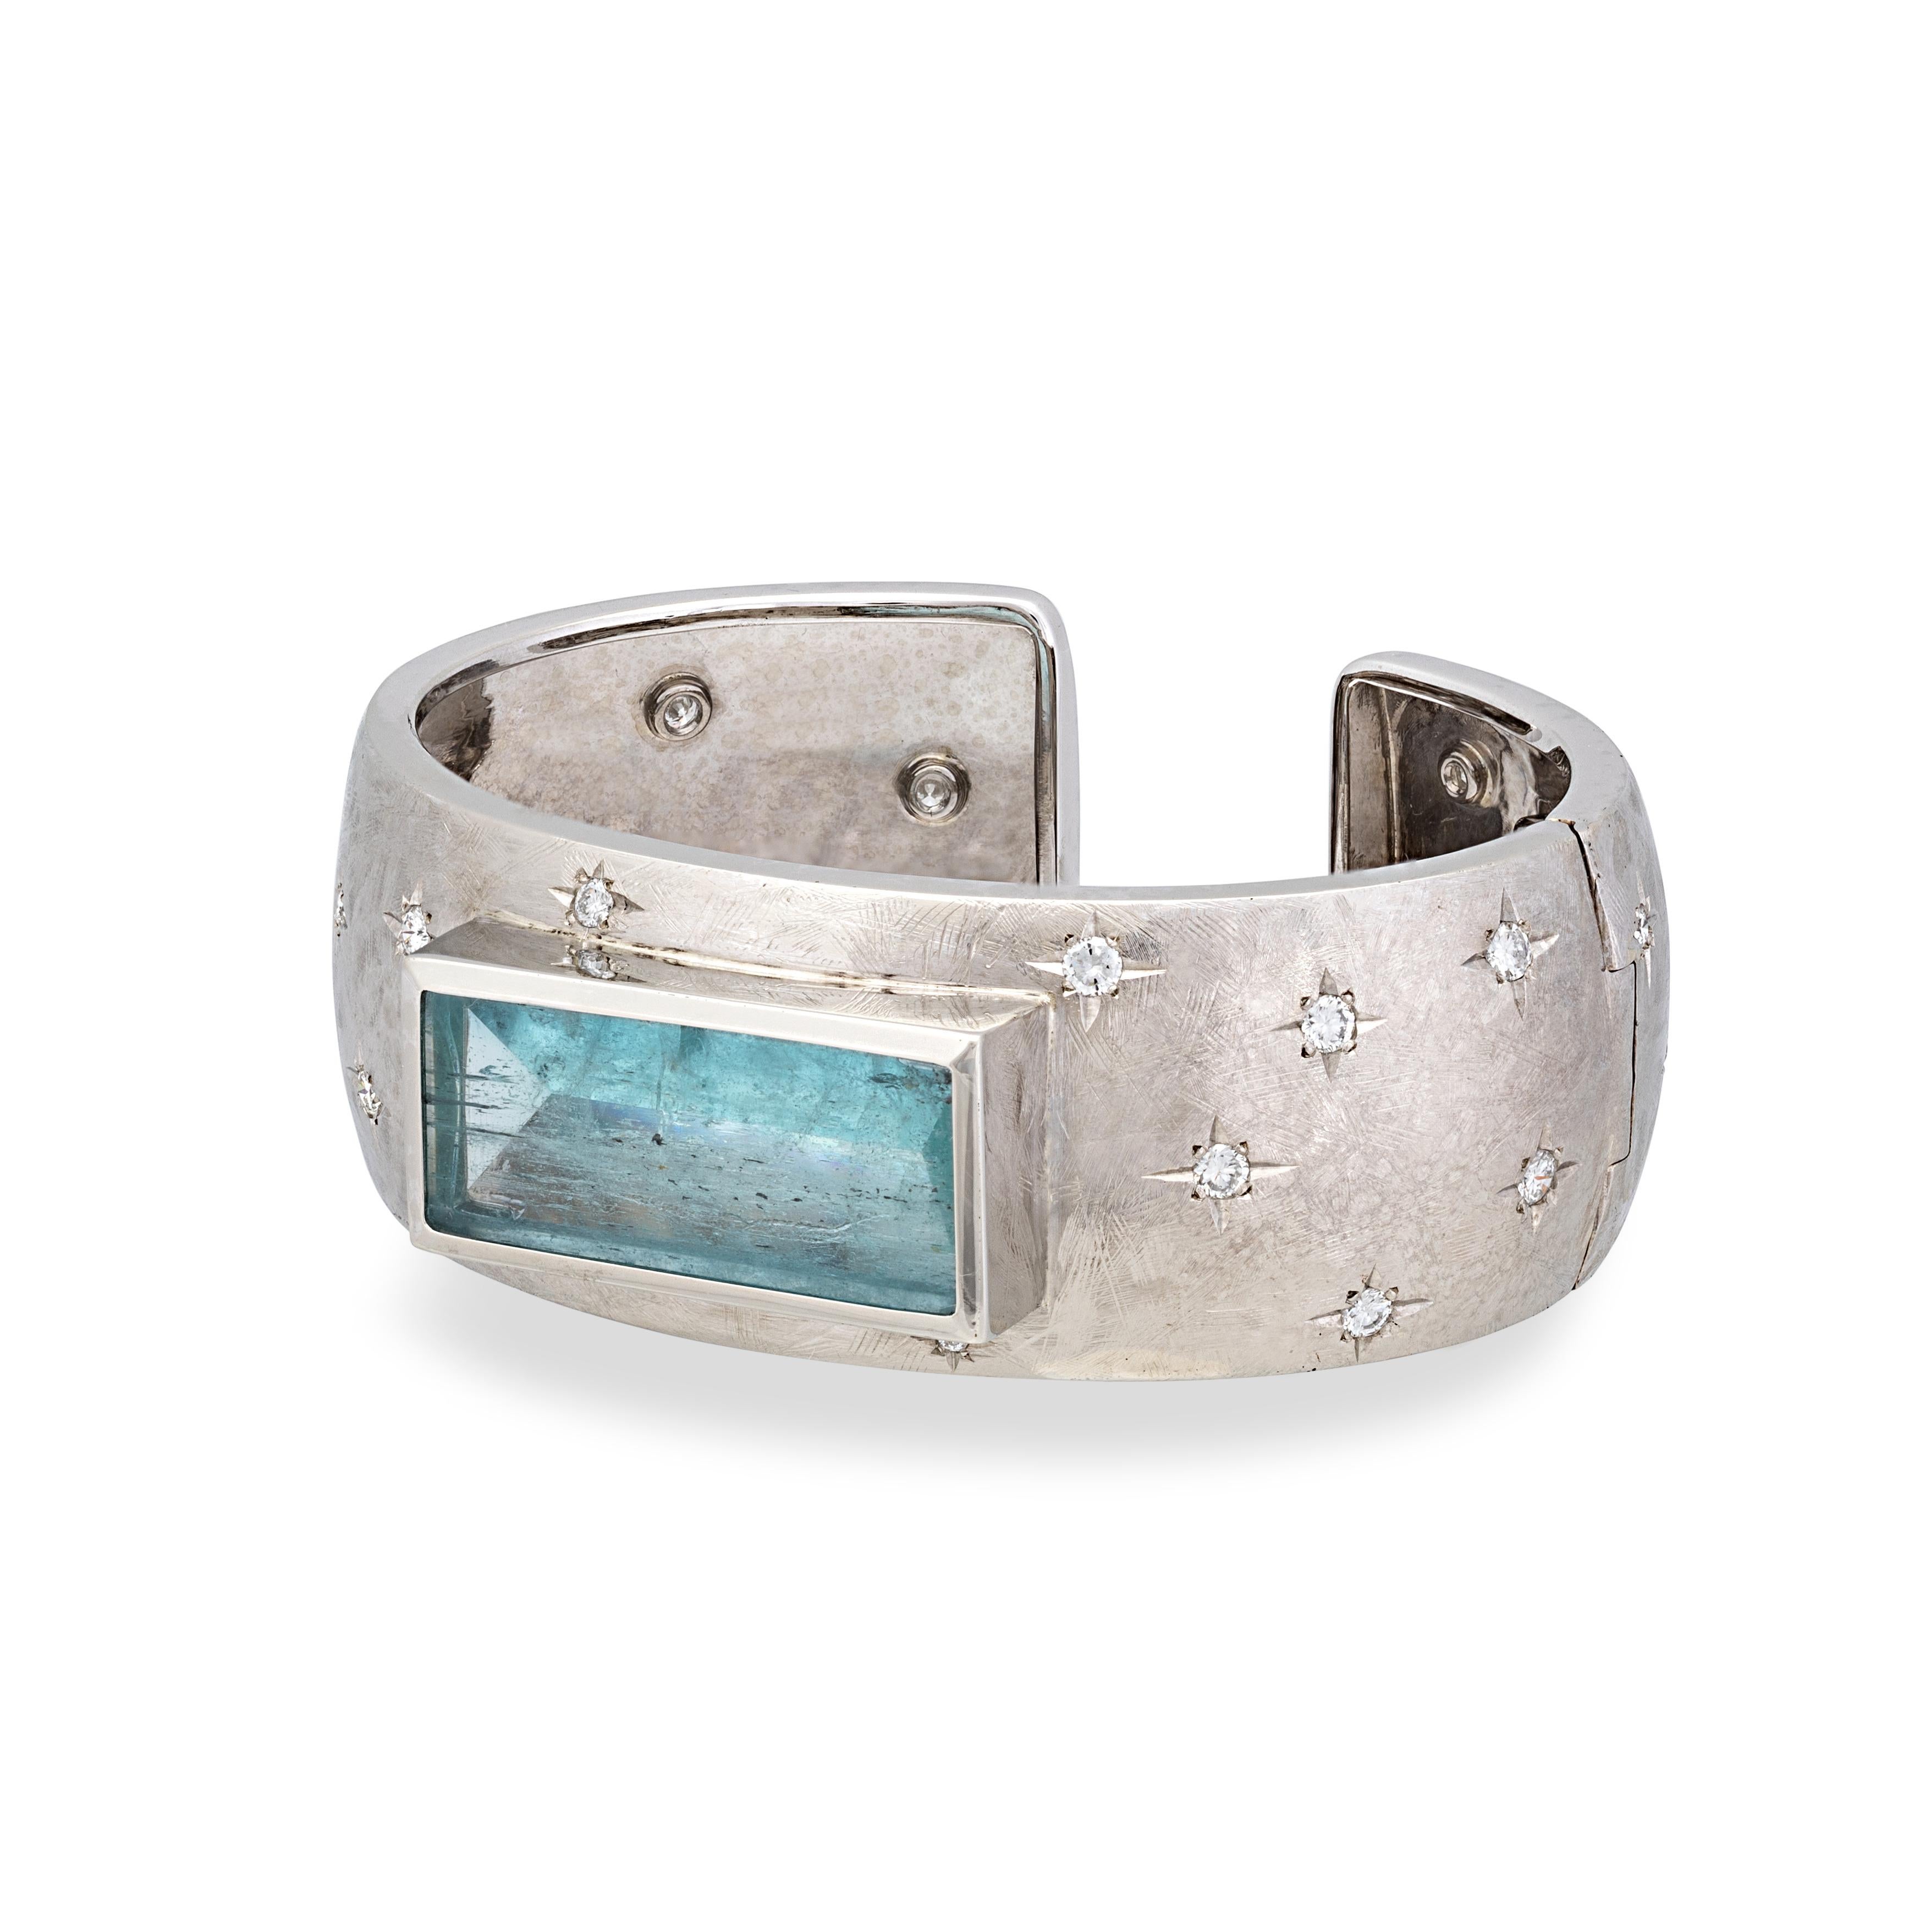 This sleek cuff style bracelet with a hidden spring hinge opening is a sophisticated piece of jewelry. Meticulously handcrafted in 18k white gold, and interspersed with 24 scintillating diamonds set in a dazzling star pattern in the band, this